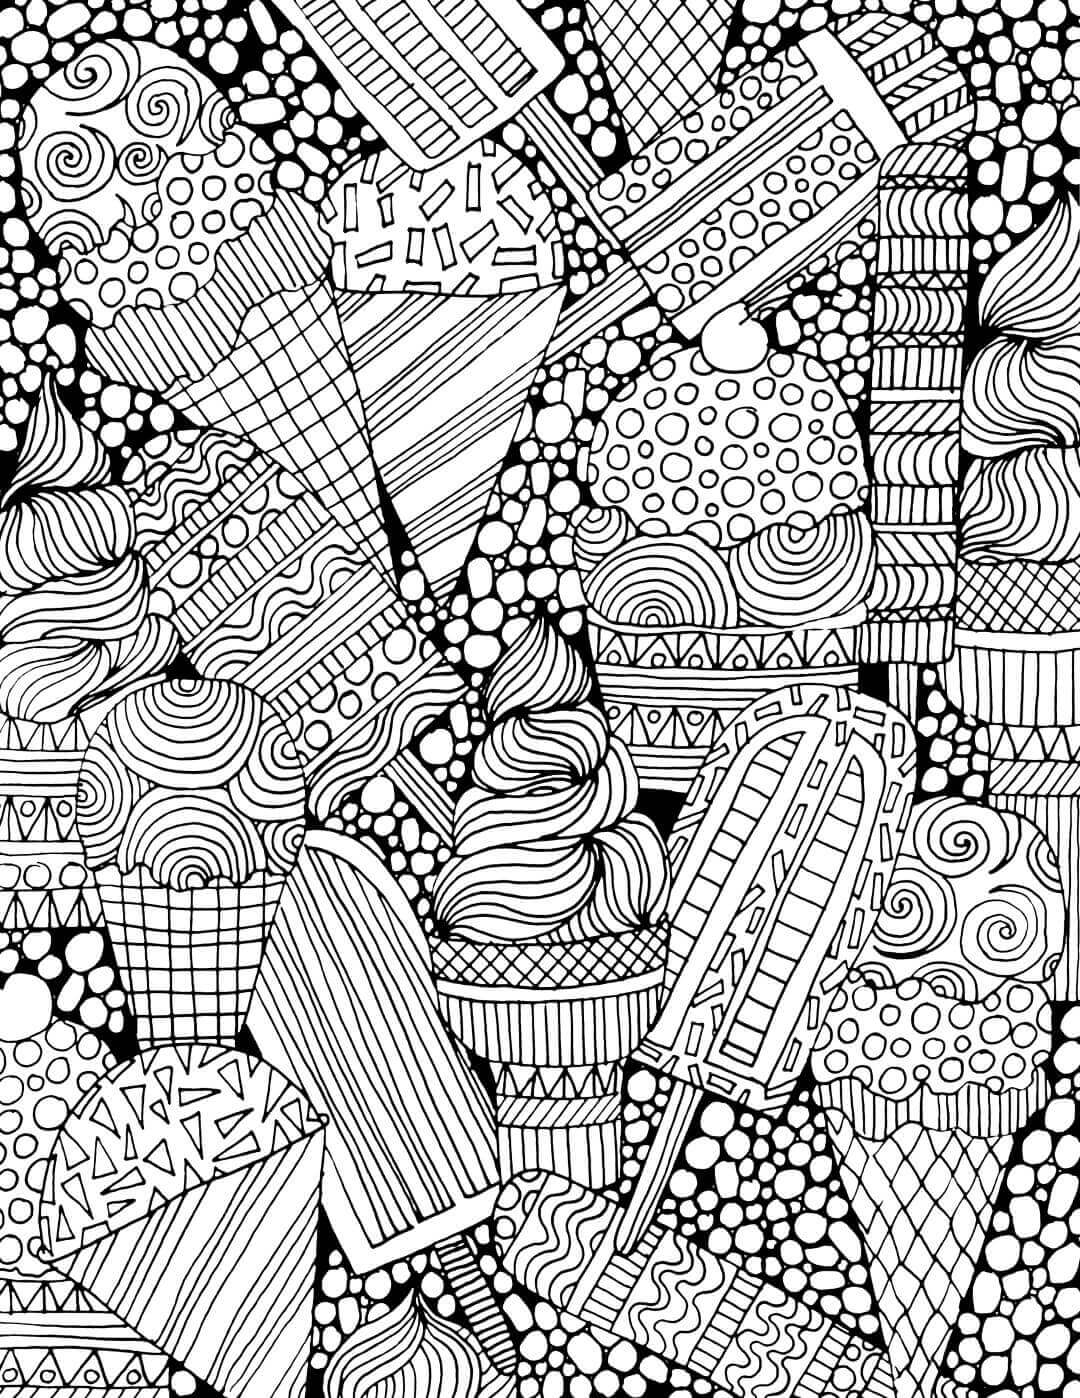 Hard Ice Cream Coloring Page For Adults